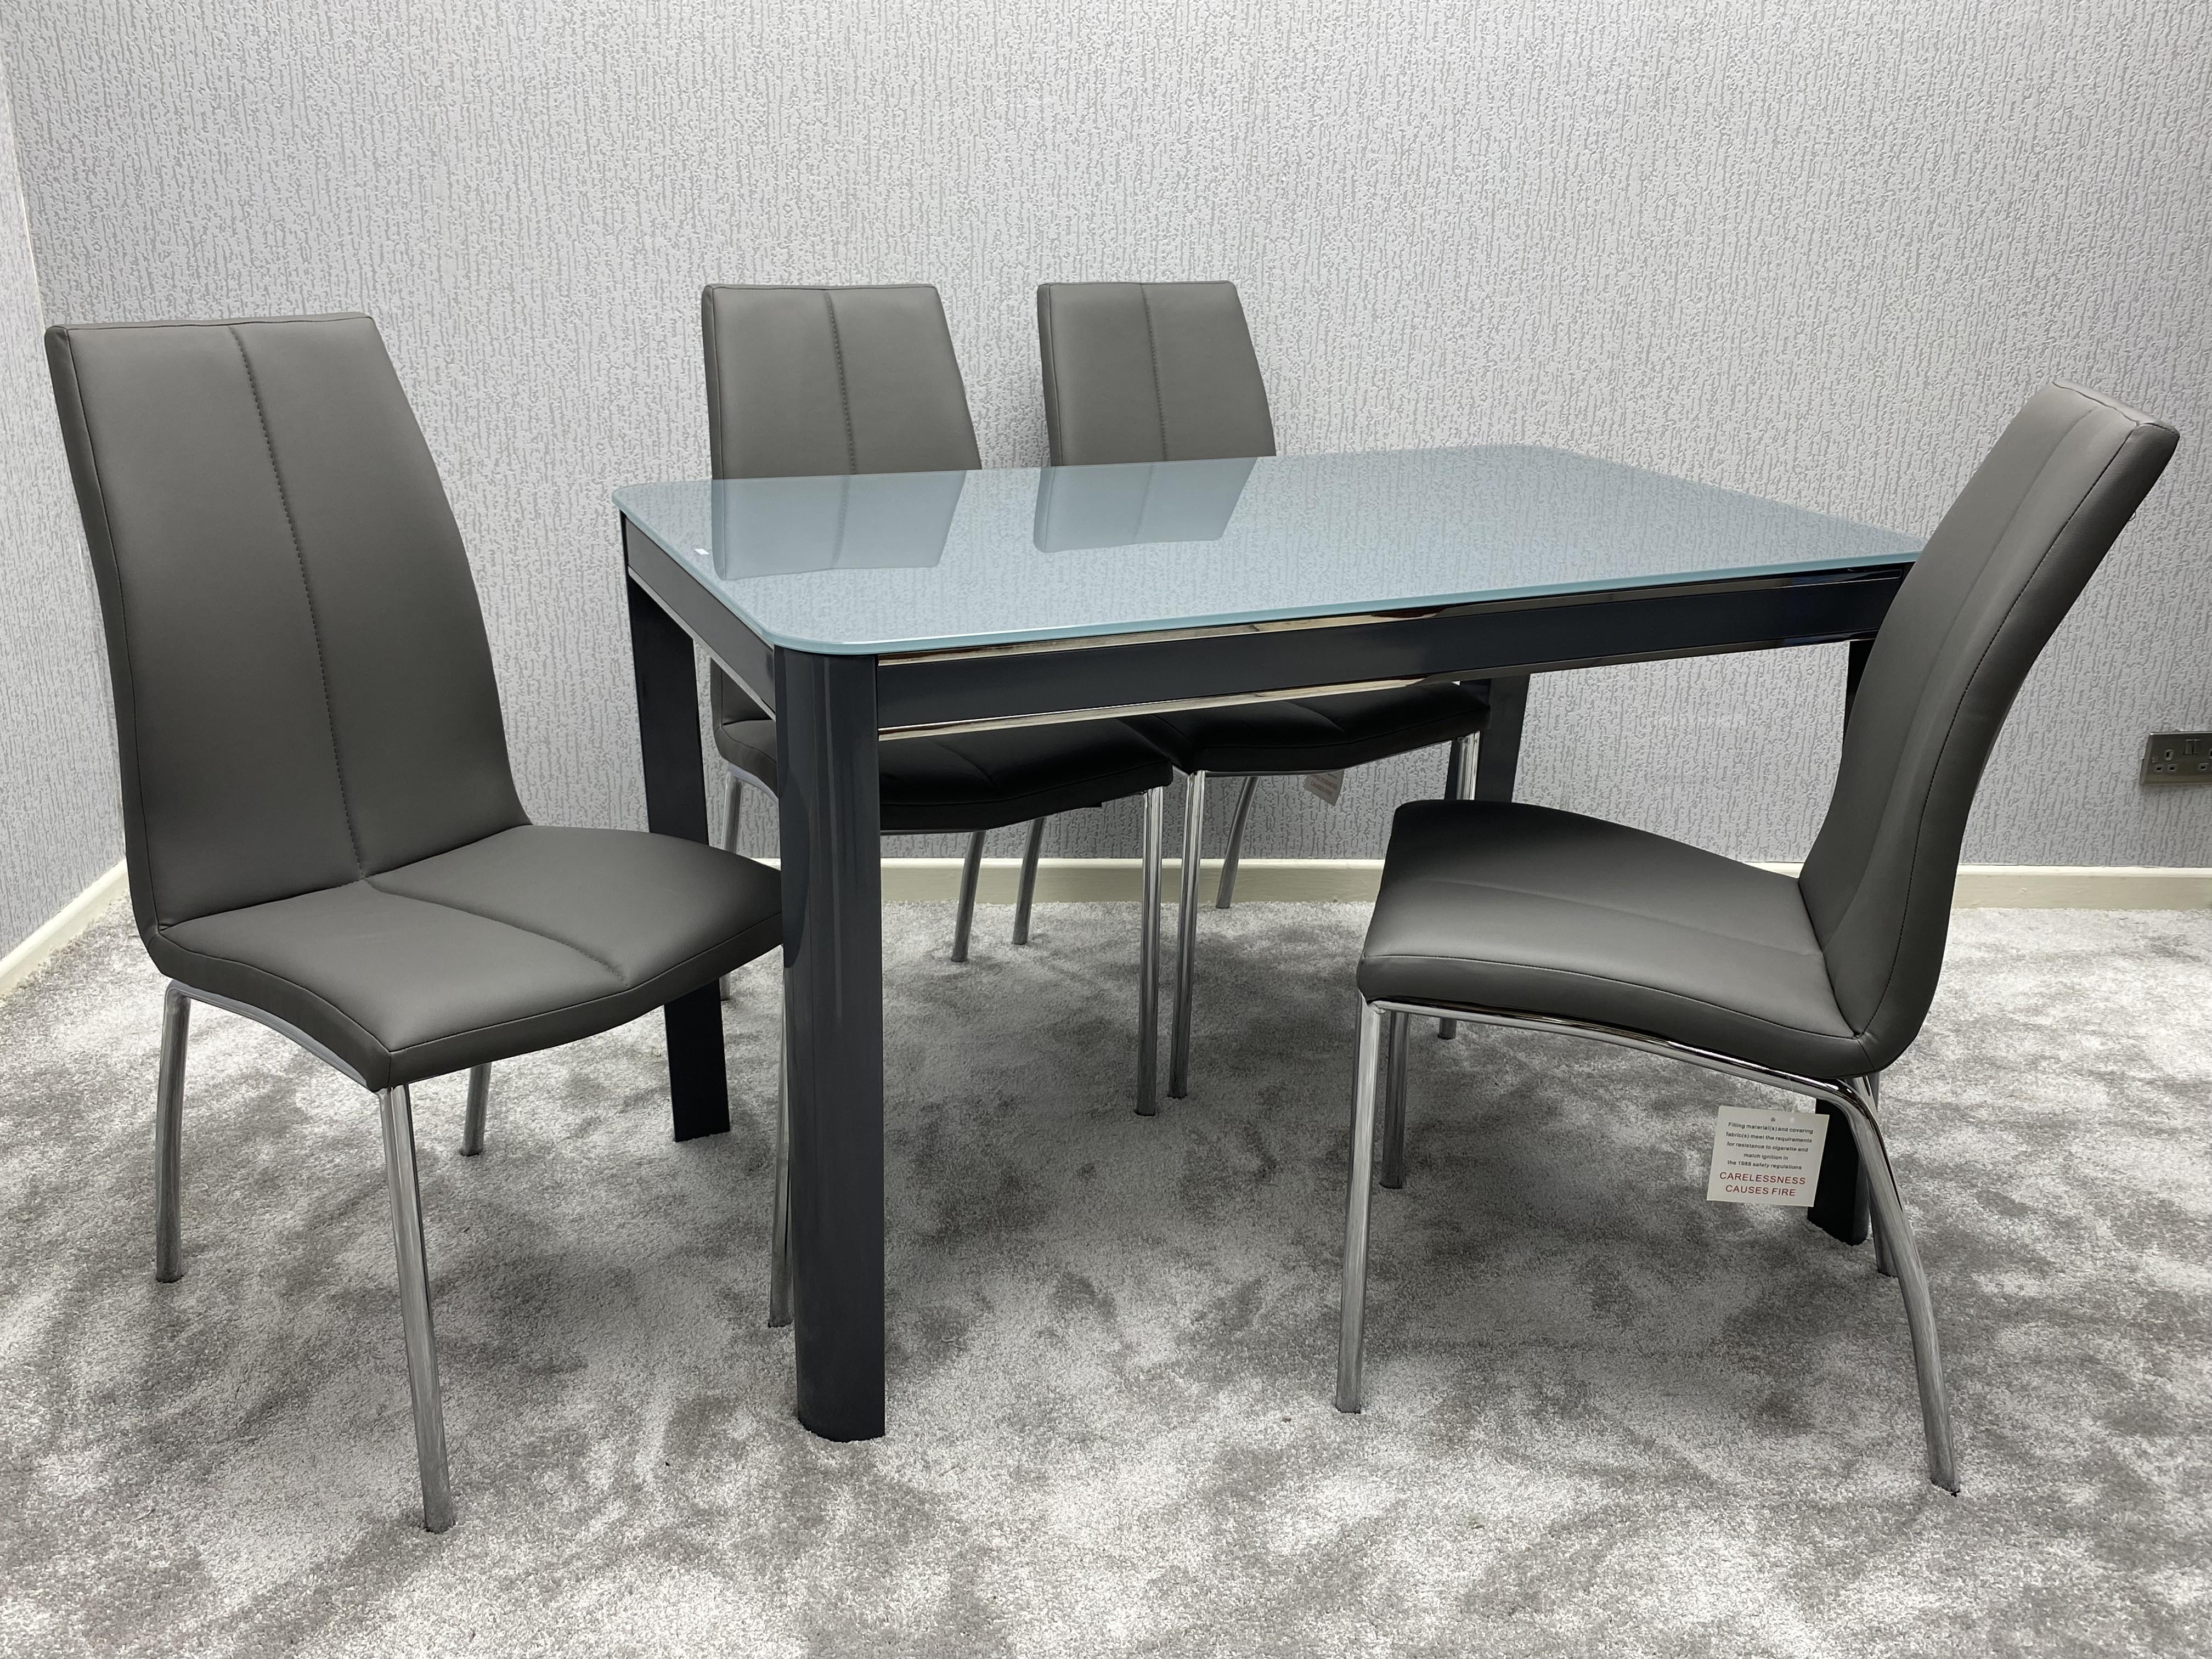 Moreno Dining Table with 4 Chair